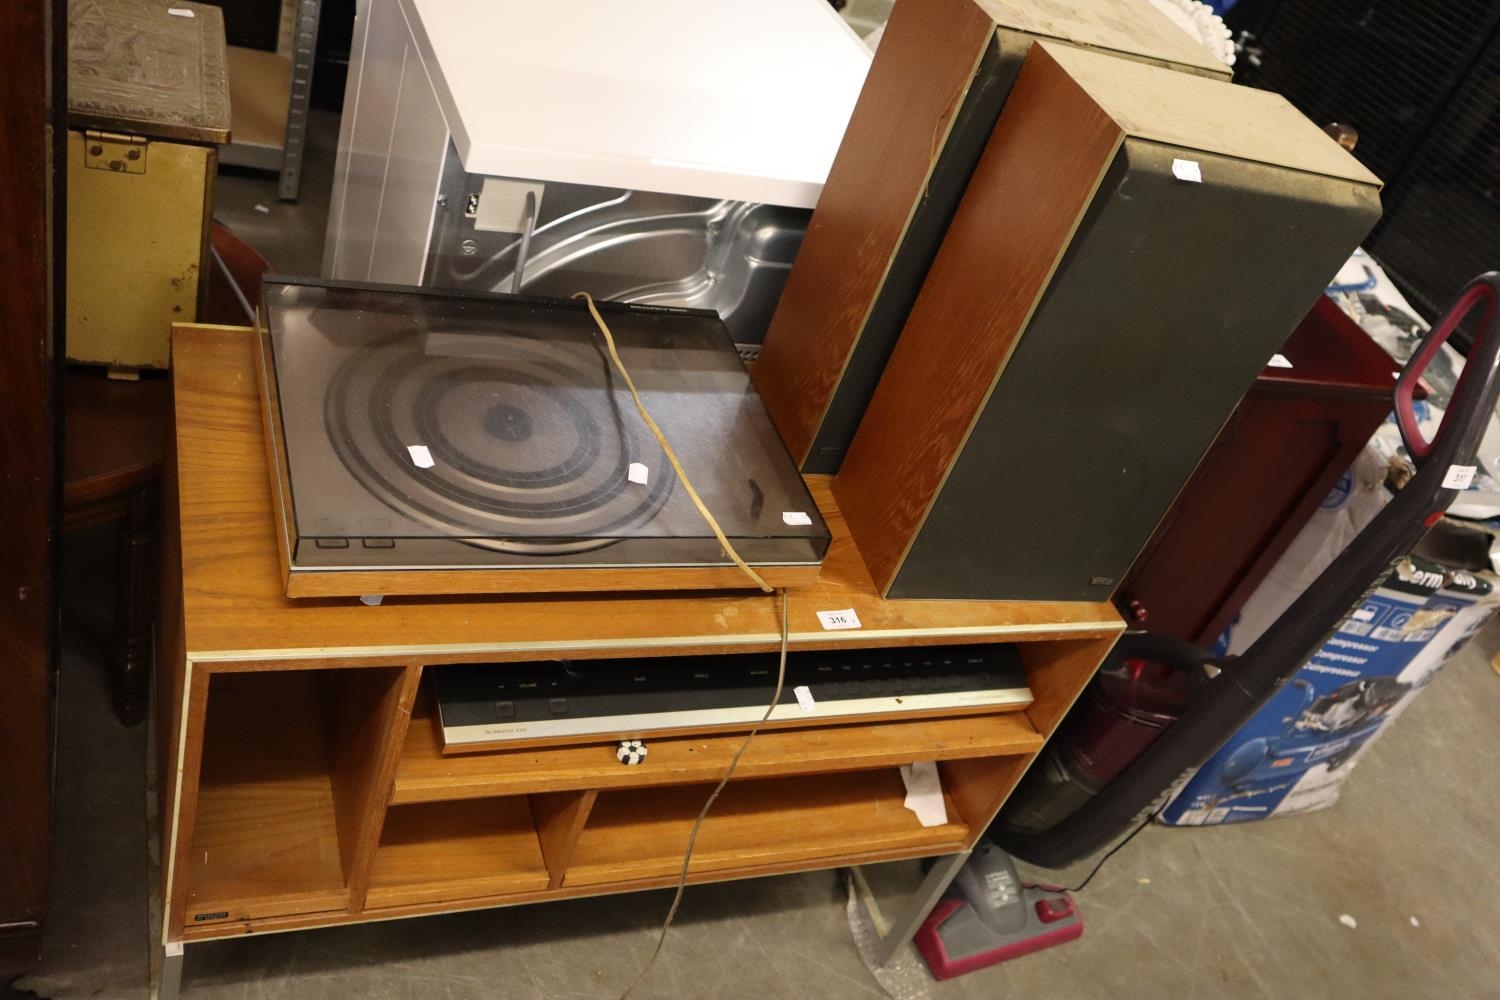 BANK AND OLUFSEN RECORD TURNTABLE, BEOGRAM 1700, BANK AND OLUFSEN AMPLIFIER, BEOMASTER 2300, BANG